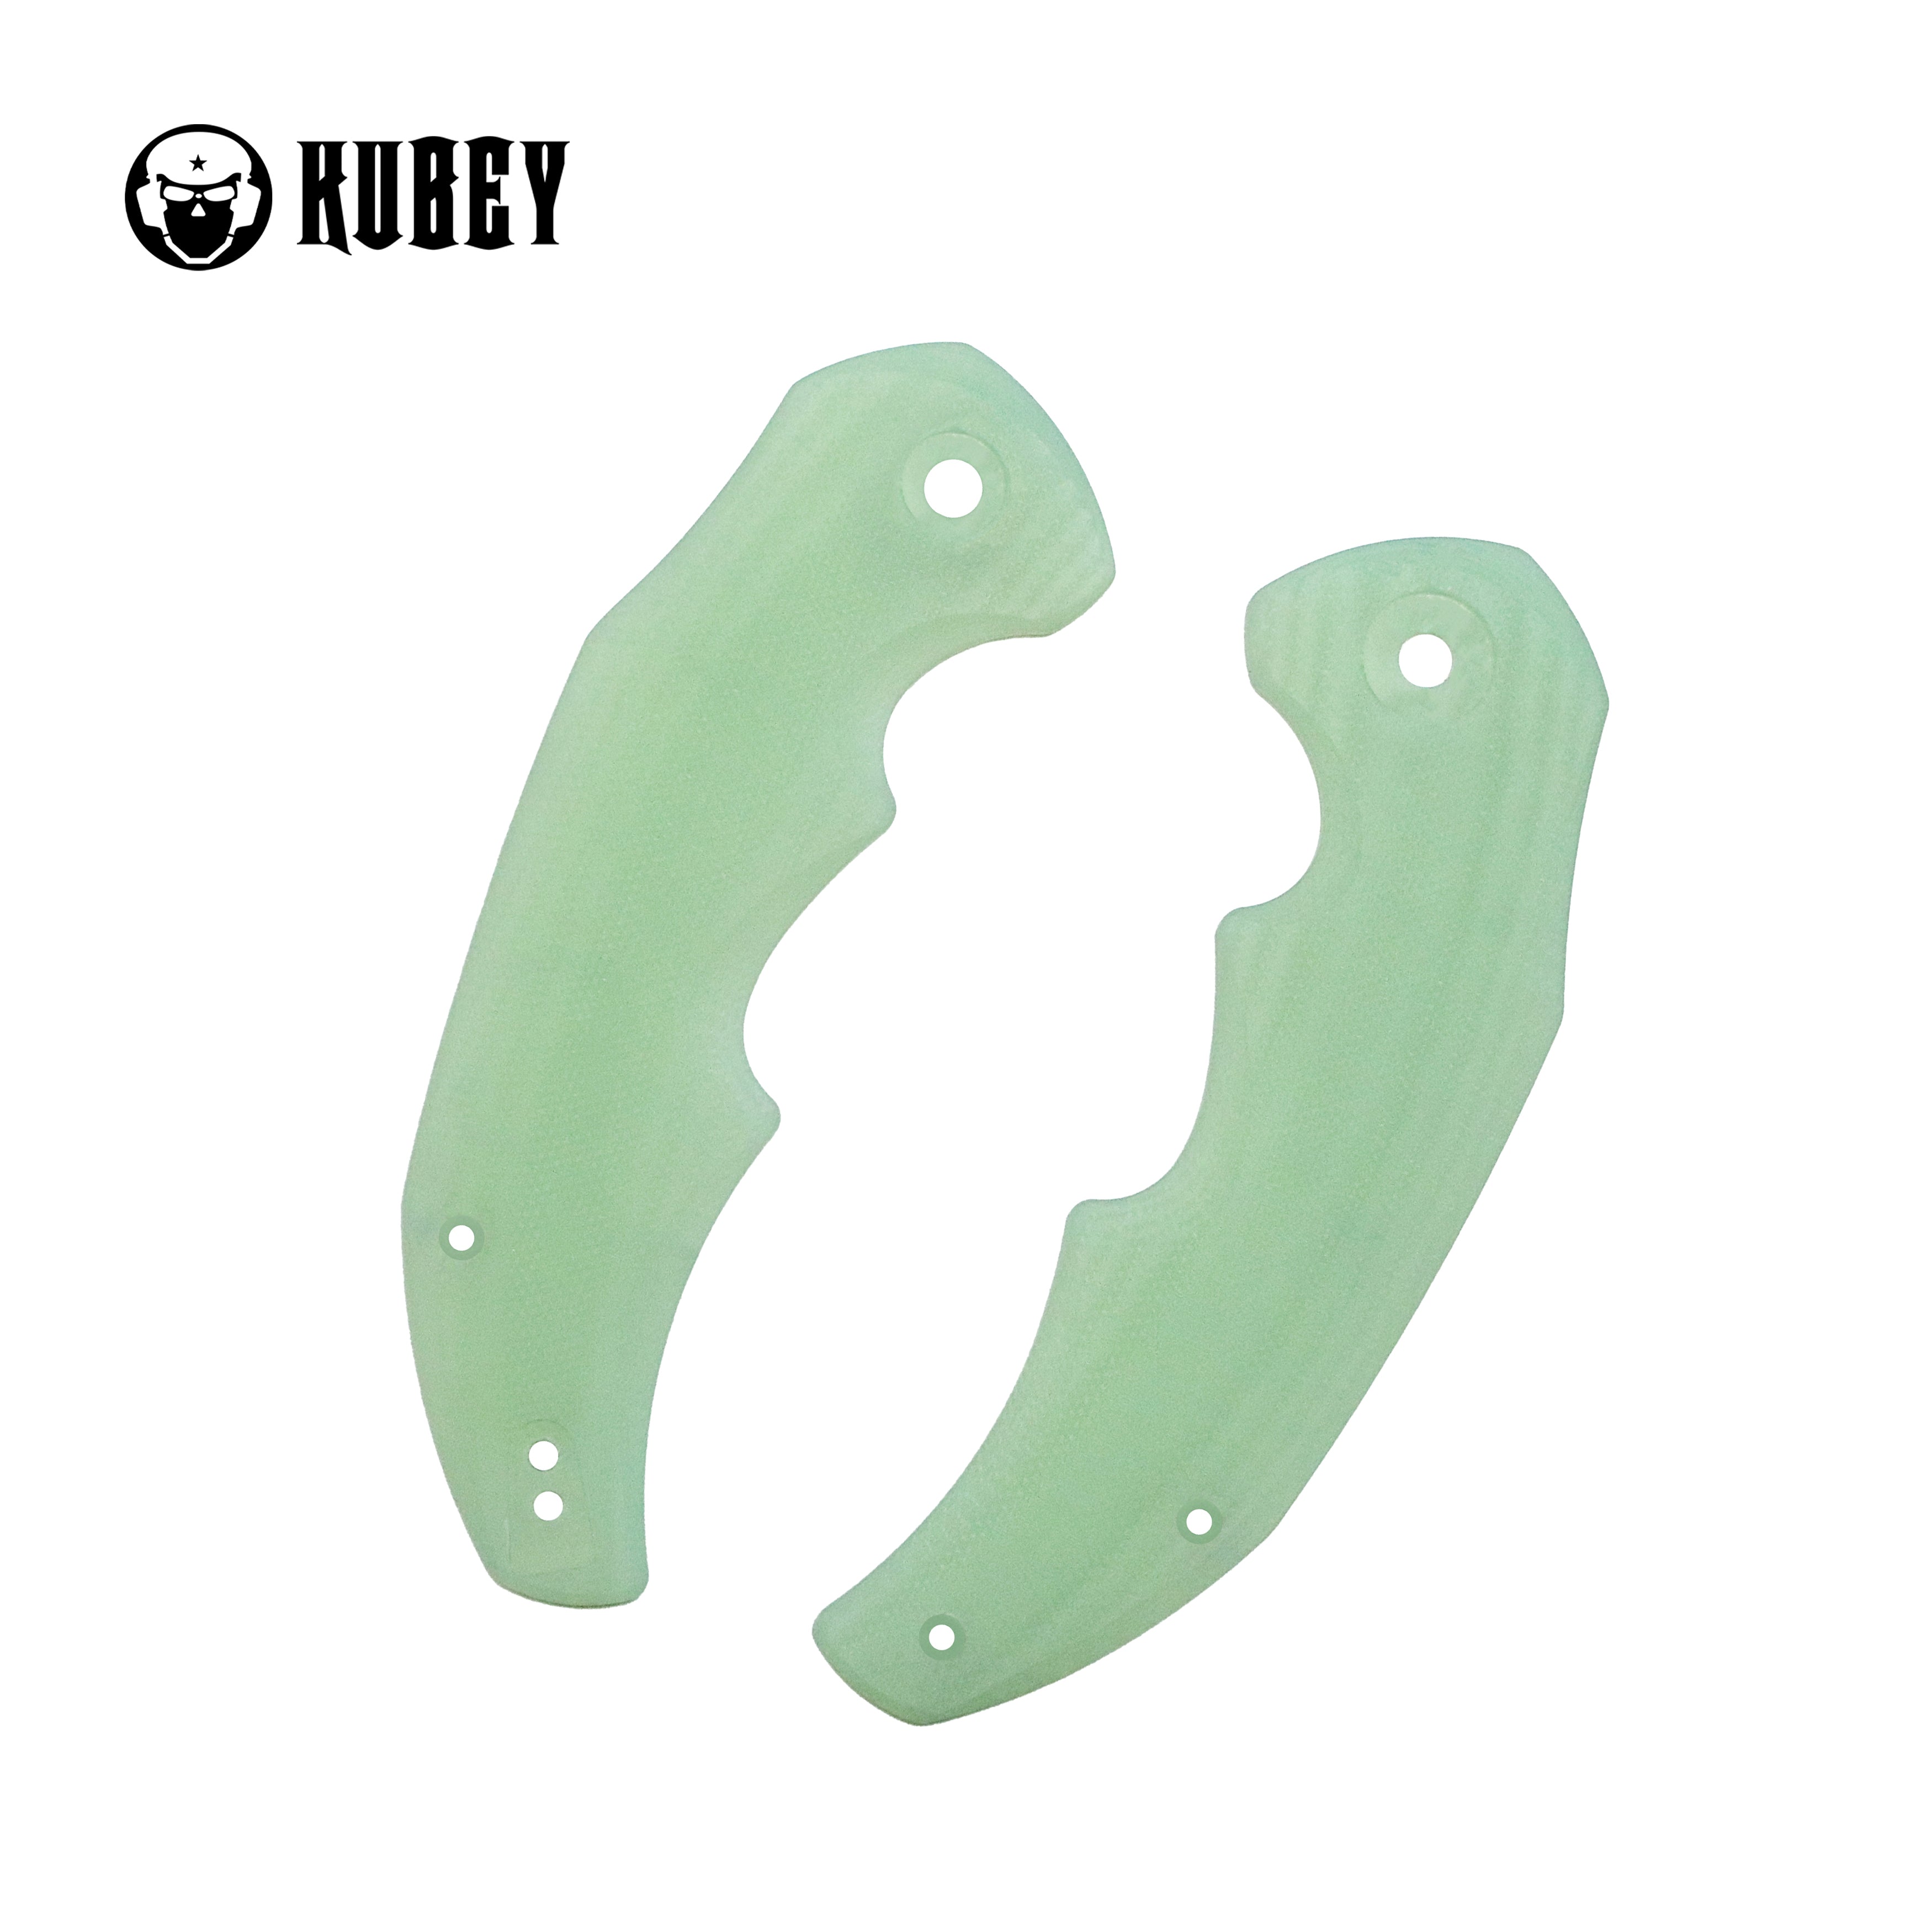 Kubey Replacement Hardware G10 Handle Scales for EDC Pocket Knives, KH038